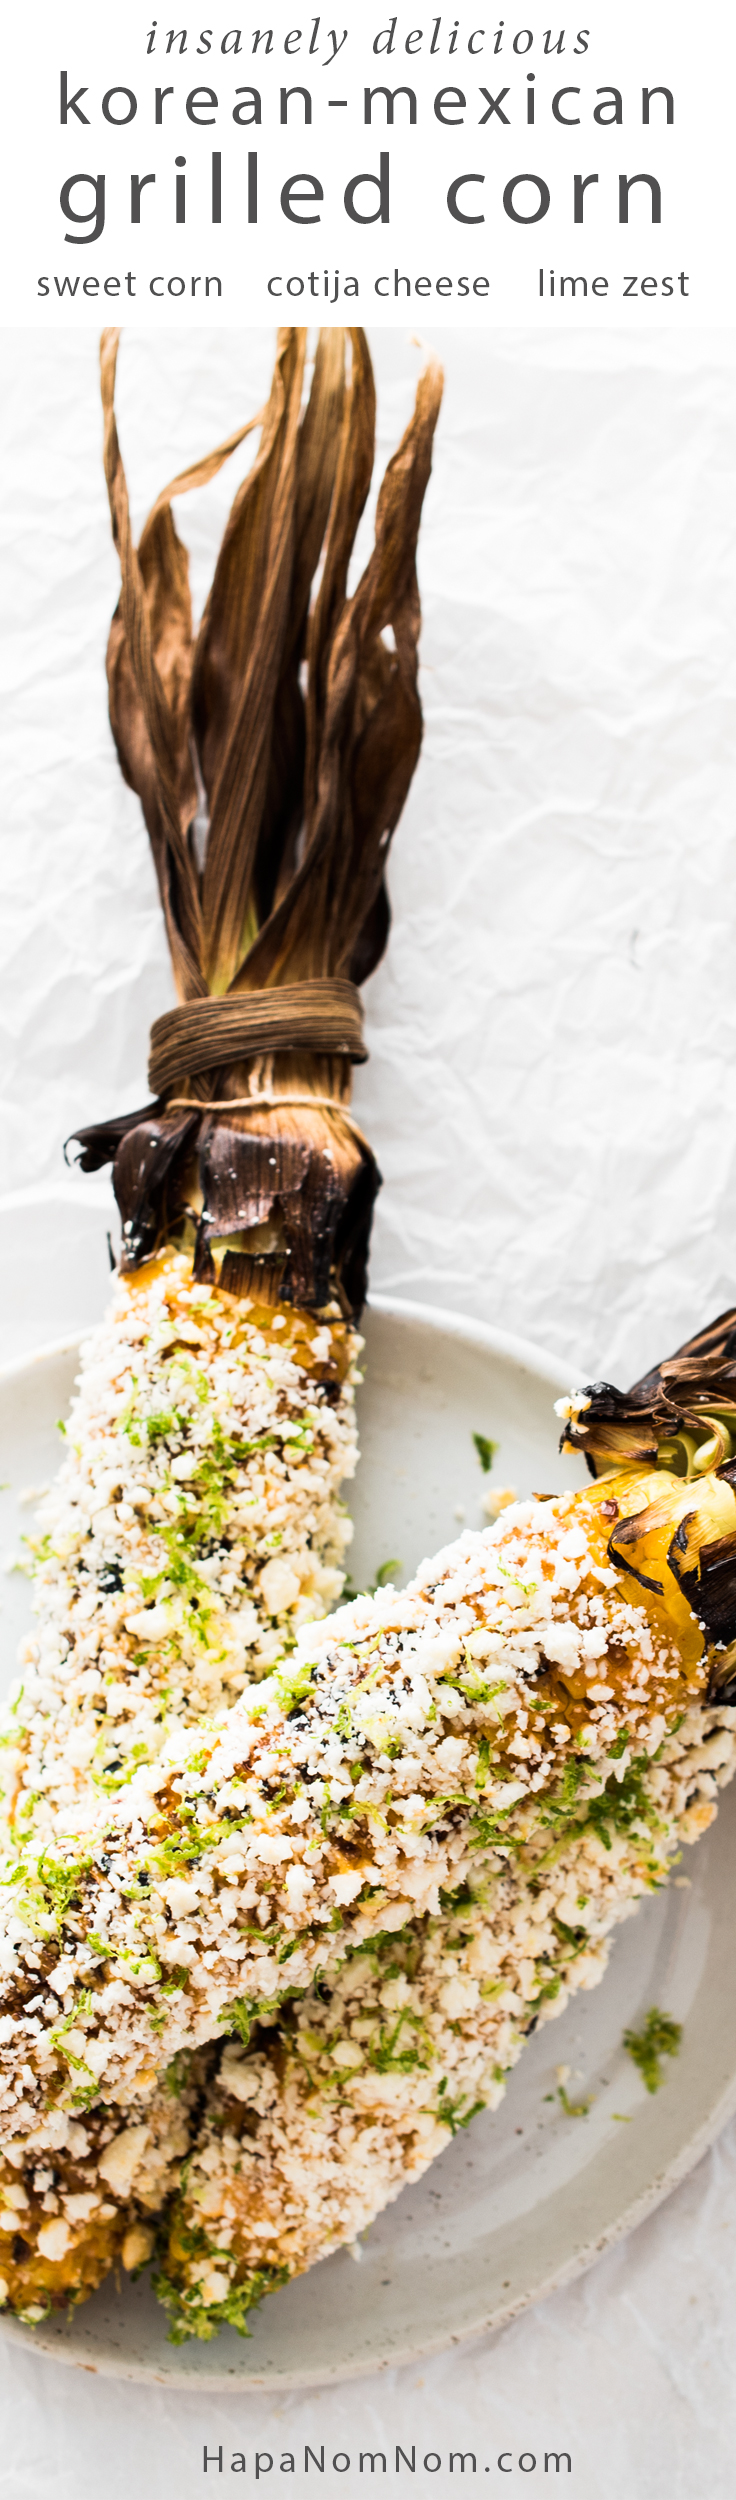 Korean-Mexican-Grilled-Corn-Pin